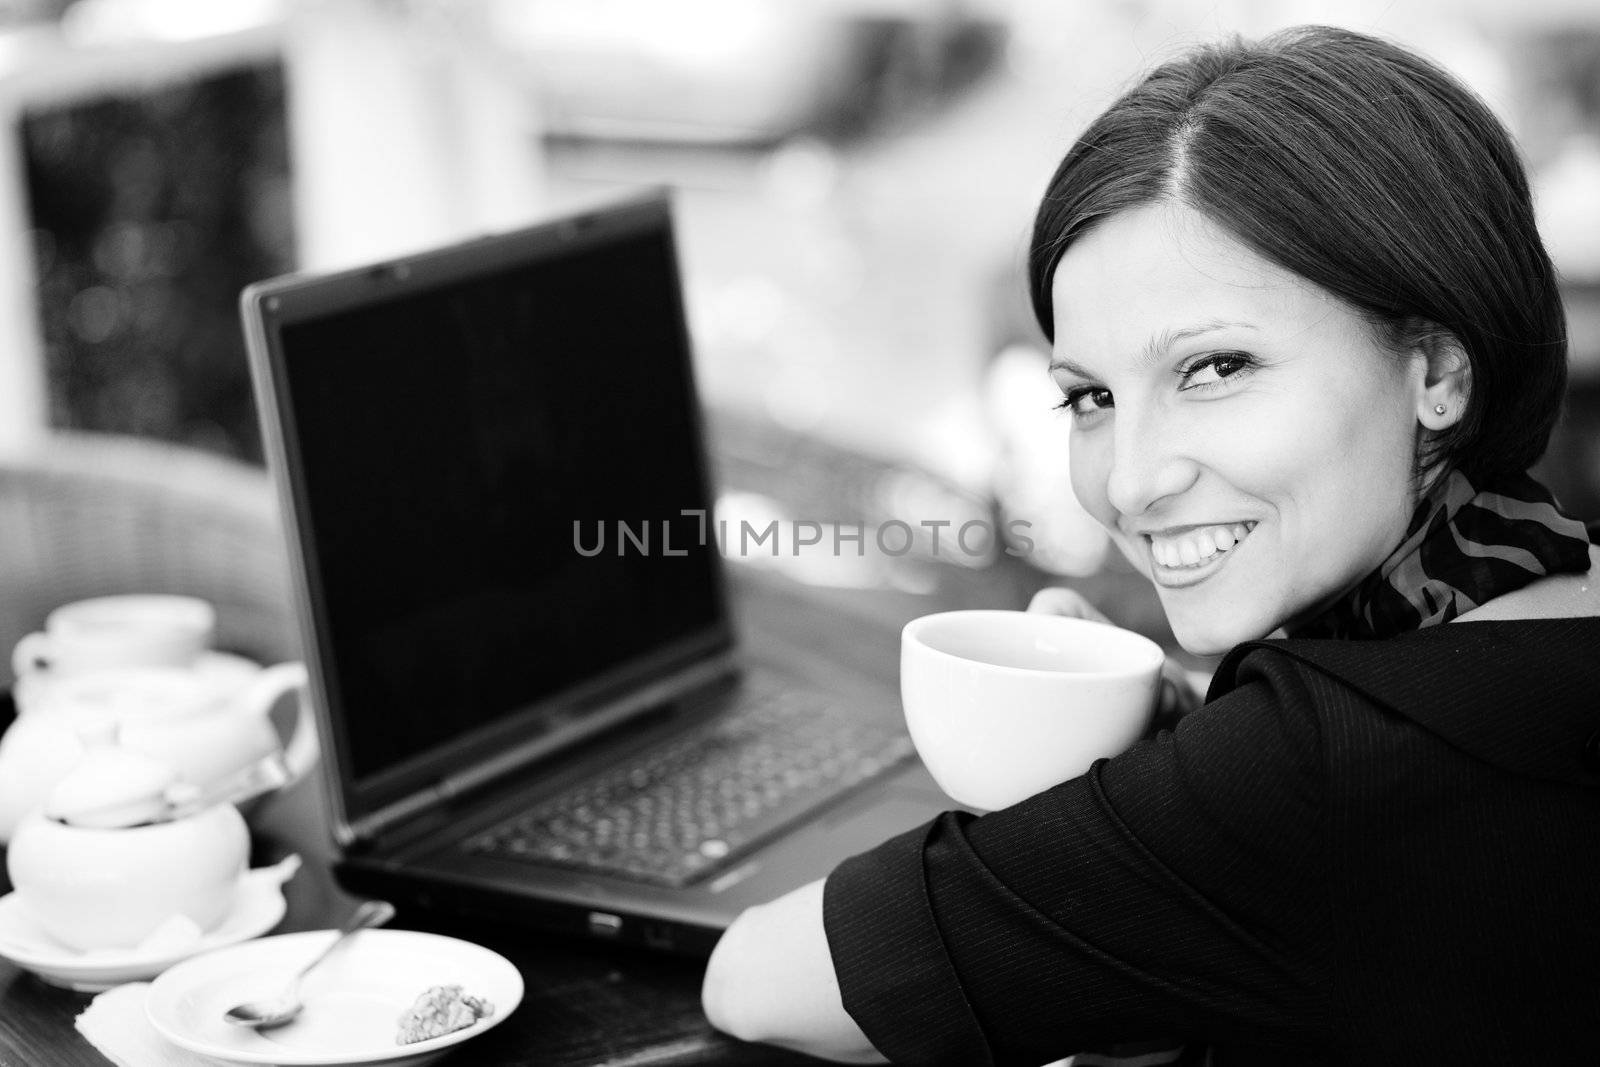 An image of a young woman at the table with laptop